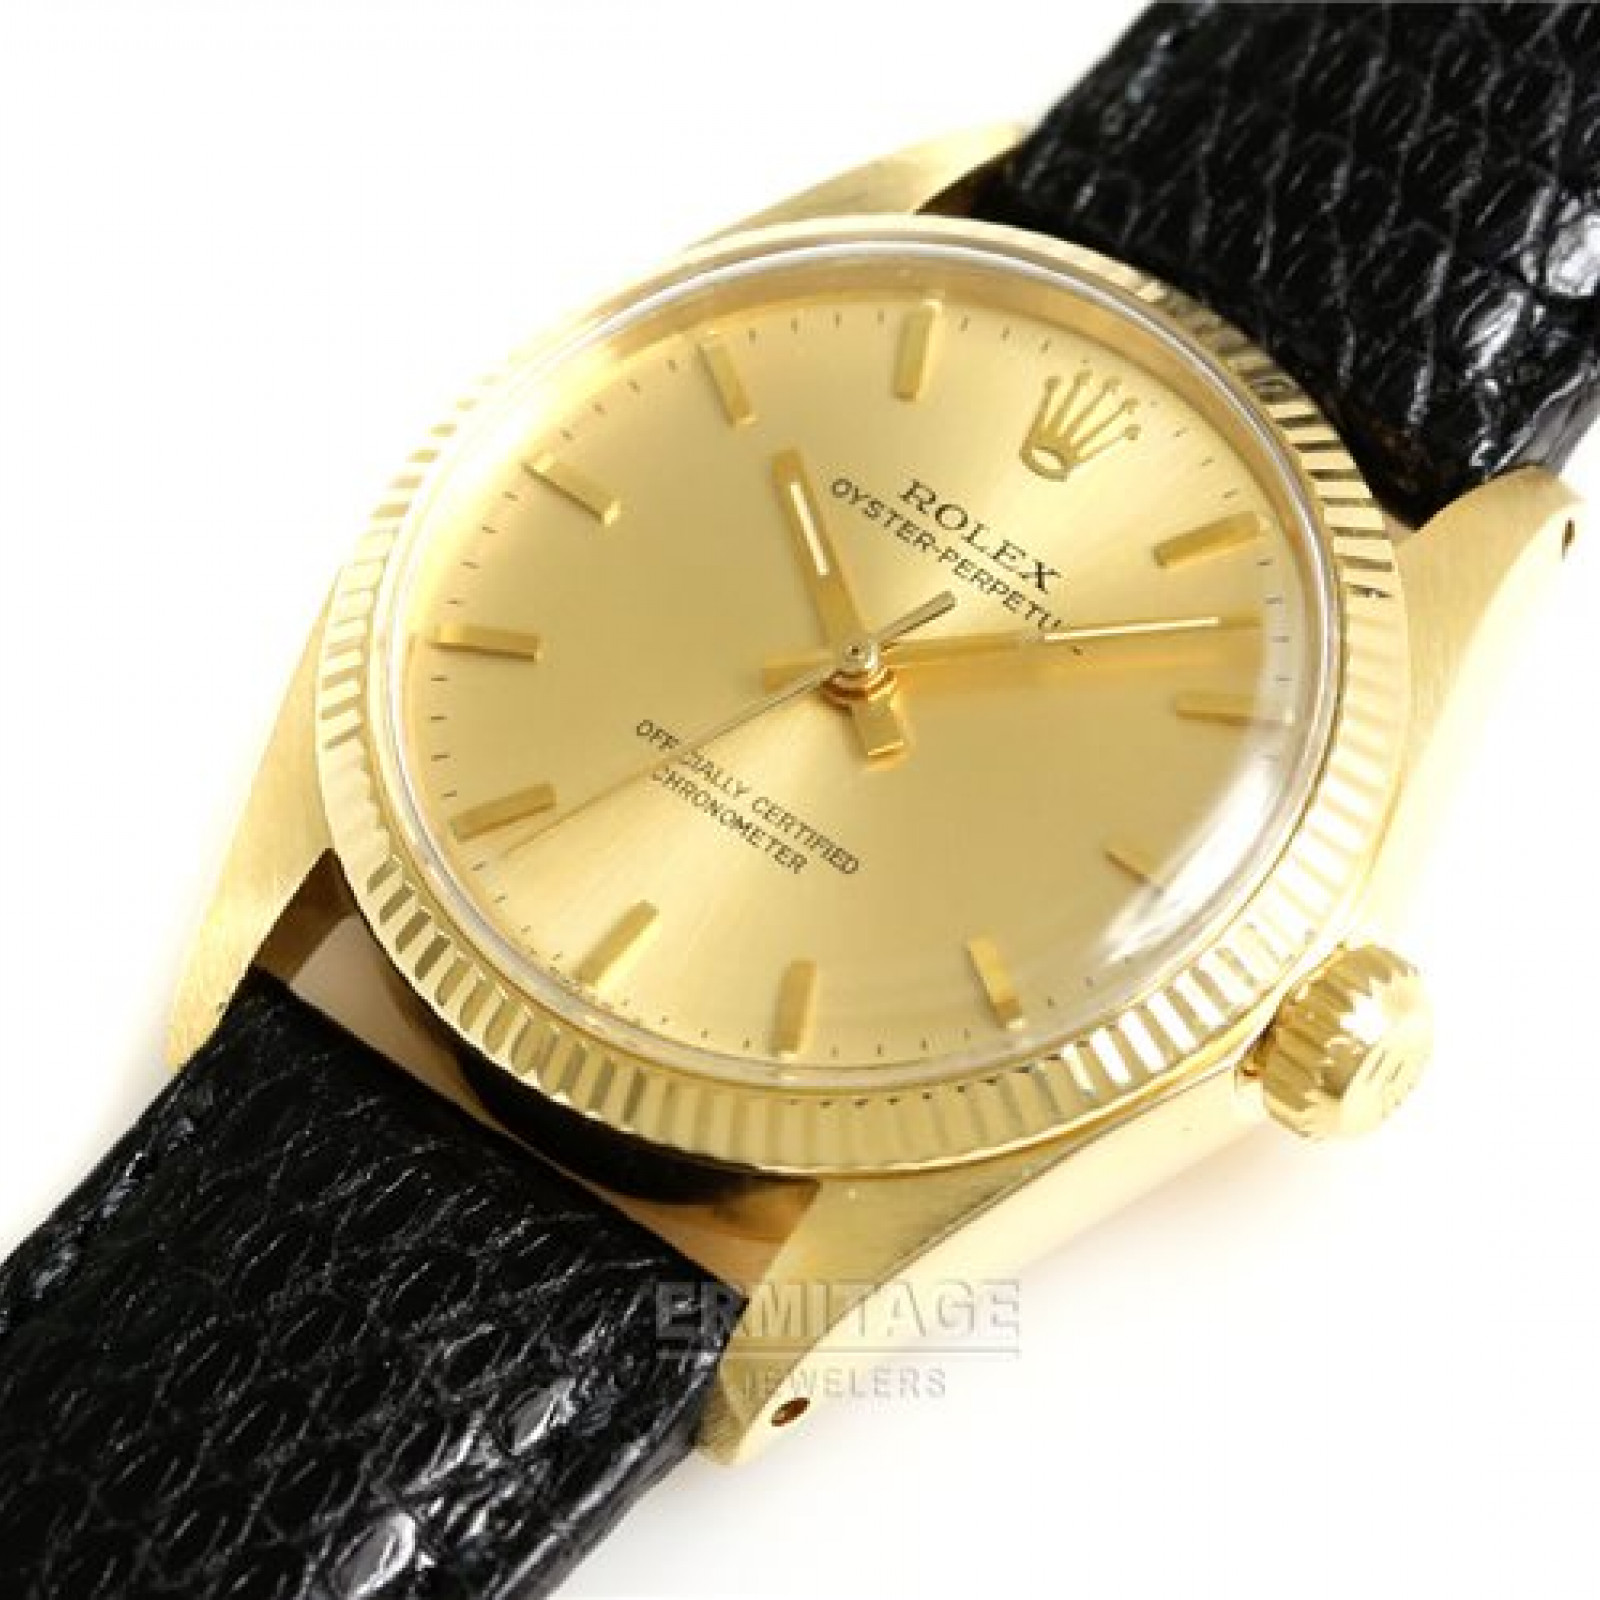 Vintage Rolex Oyster Perpetual 6551